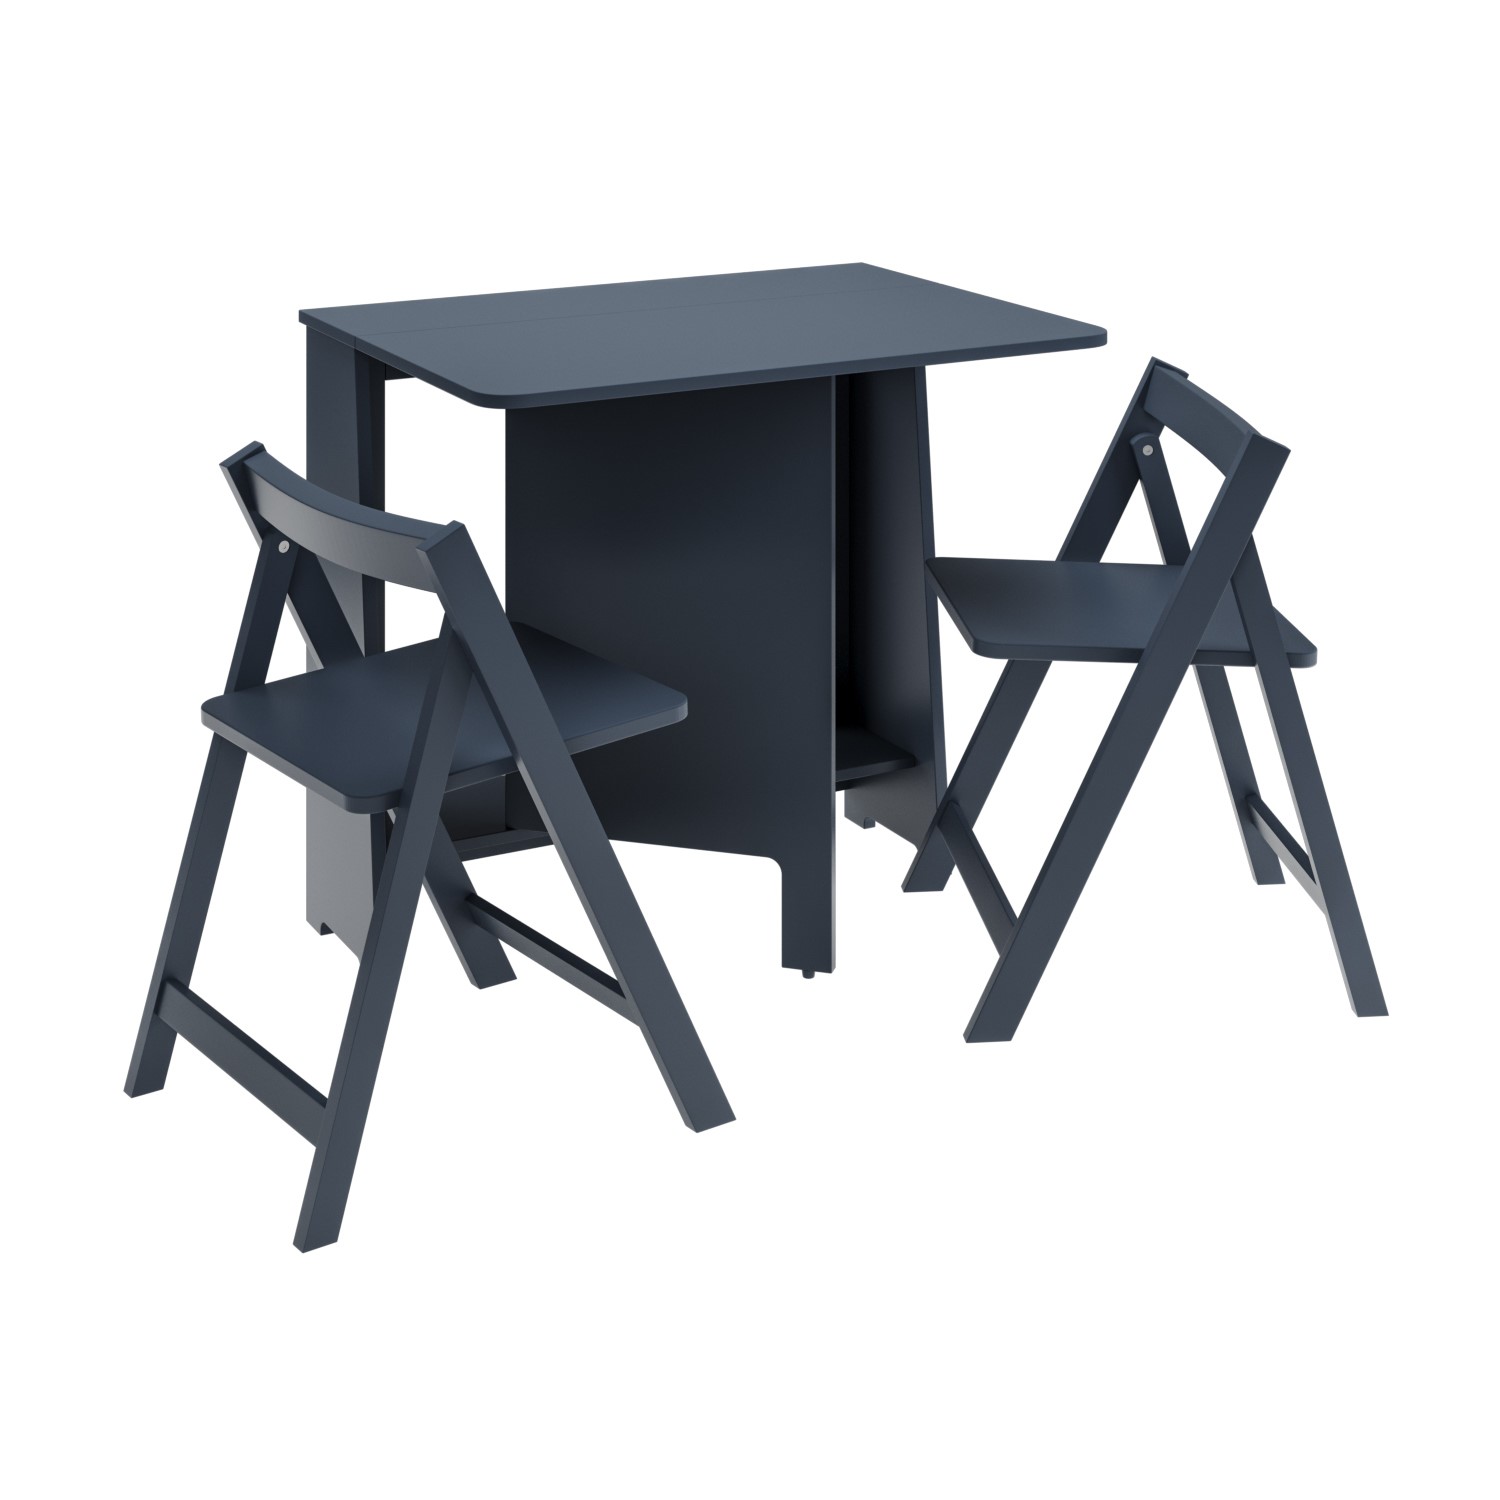 Photo of Navy space saving drop leaf dining table and chairs - seats 2 - kylee